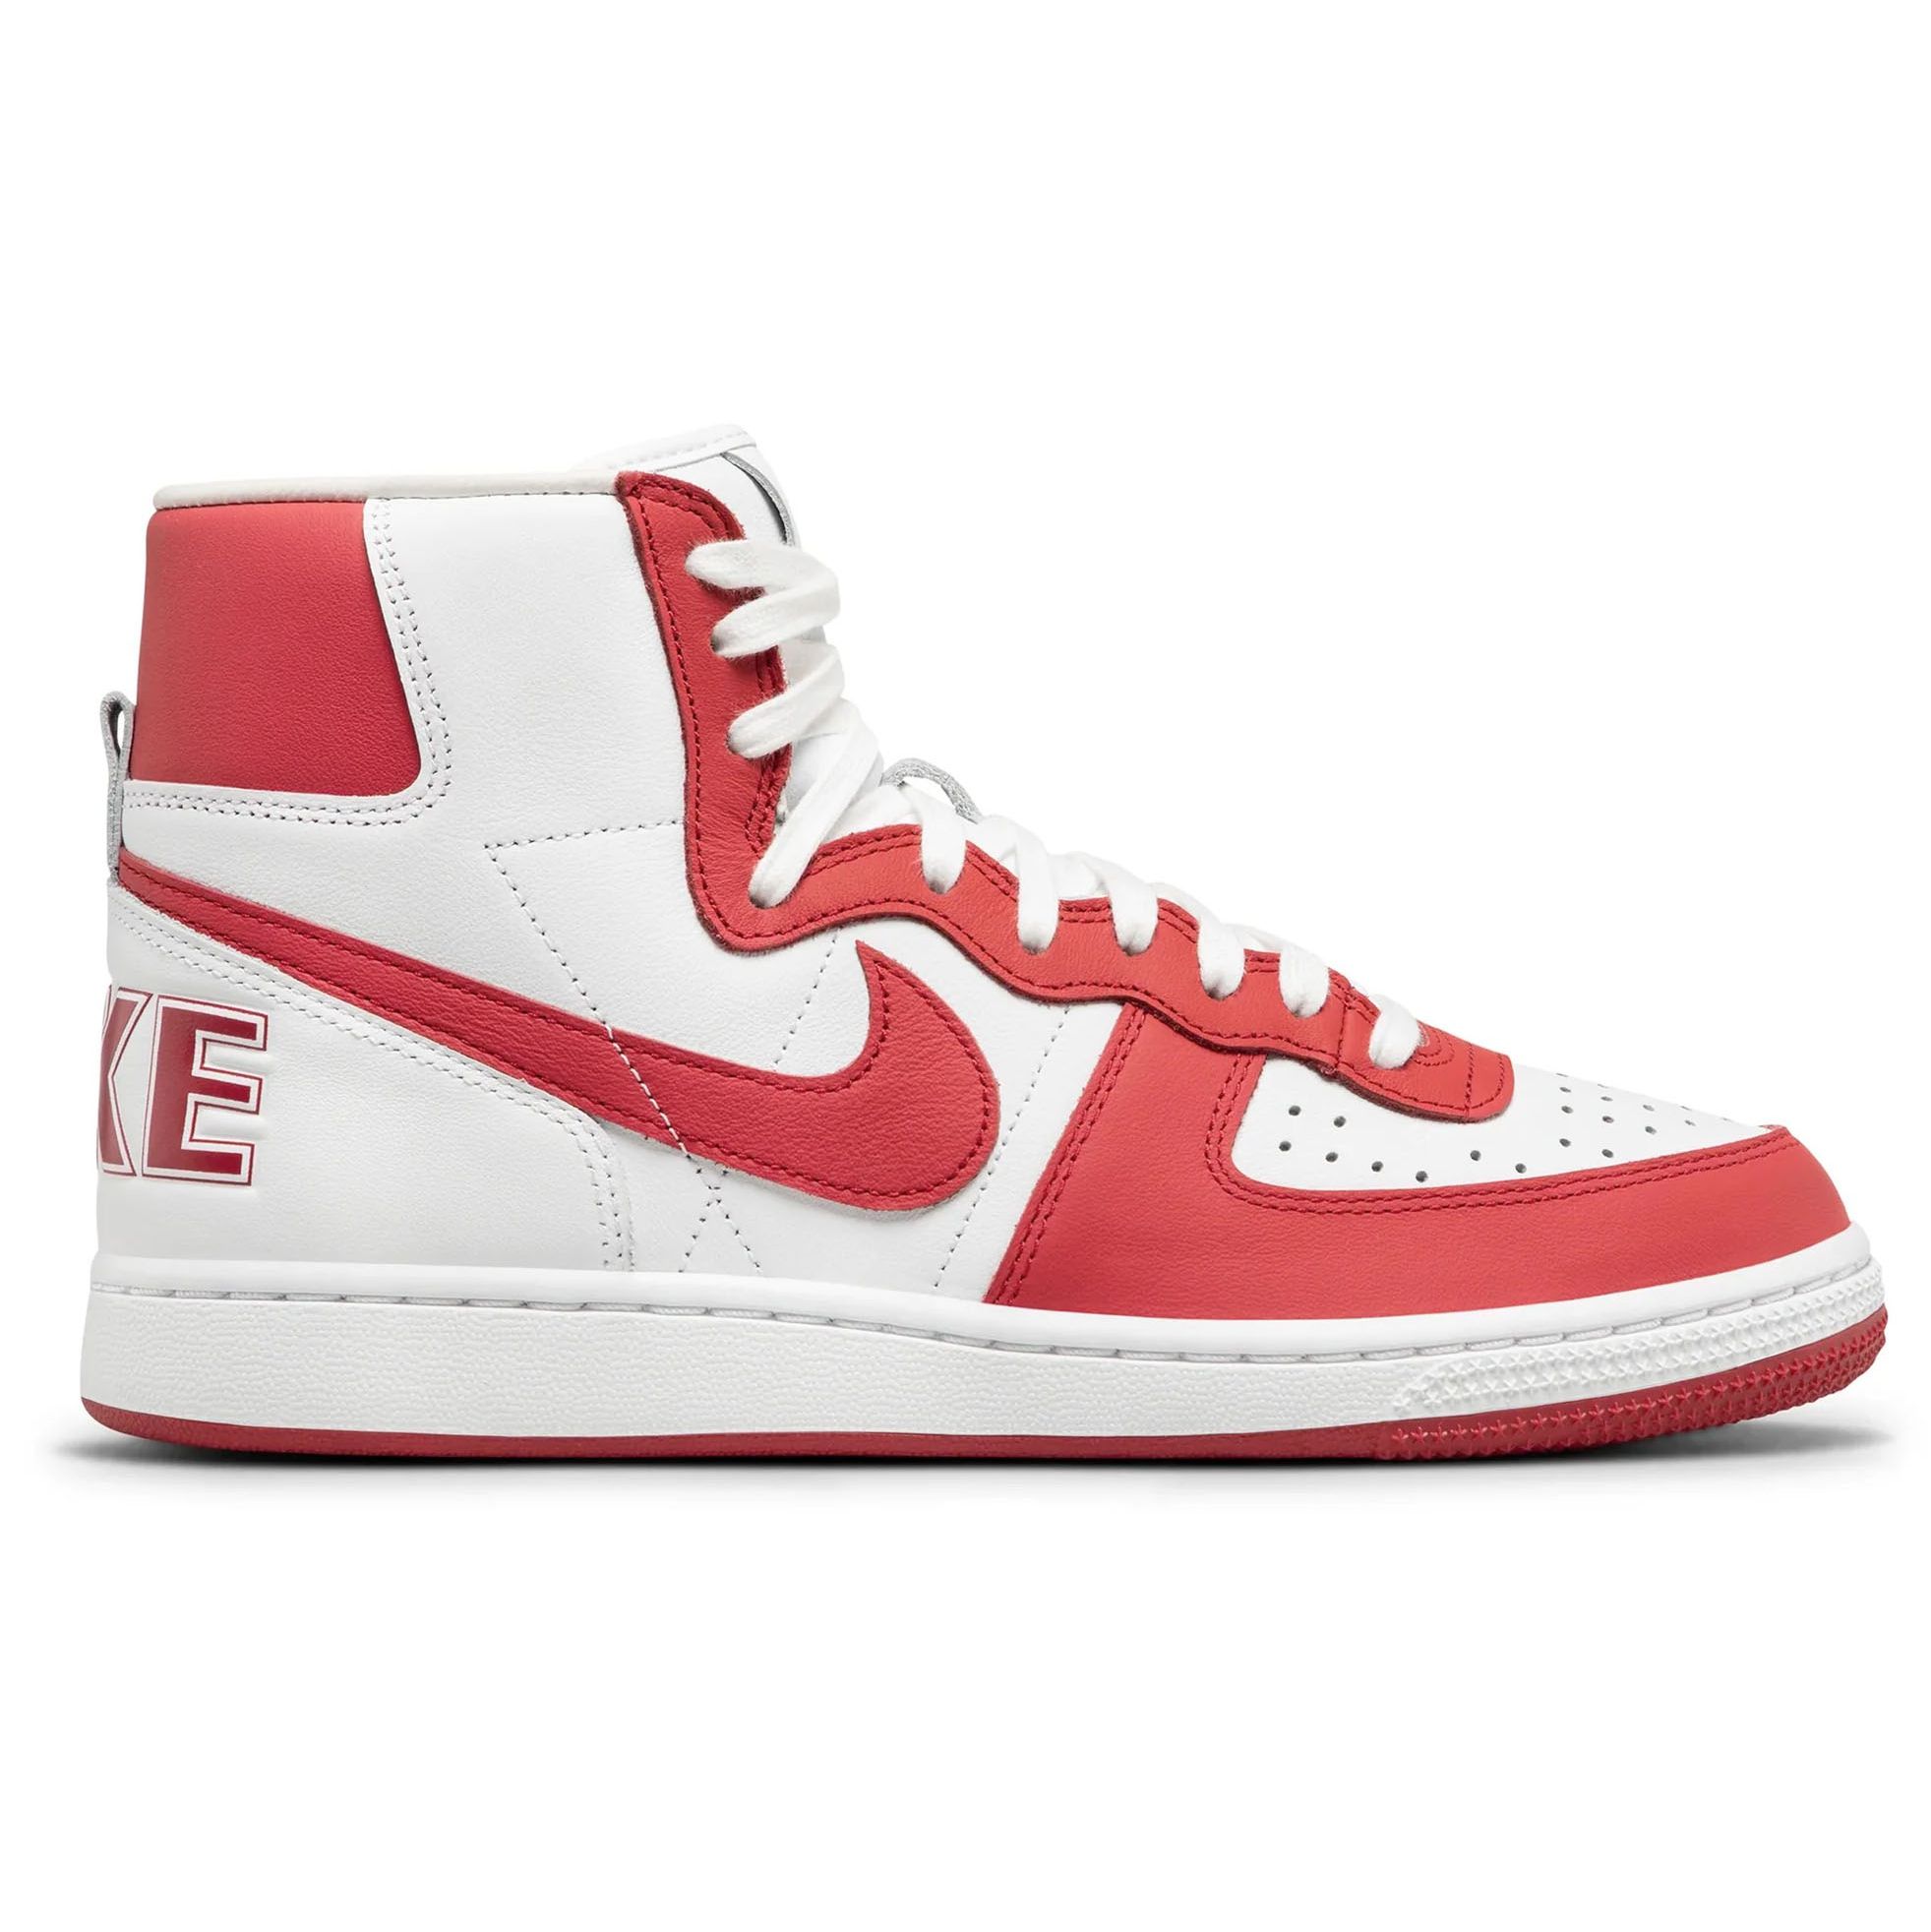 Nike Terminator High SP Comme des Garcons Homme Plus Red